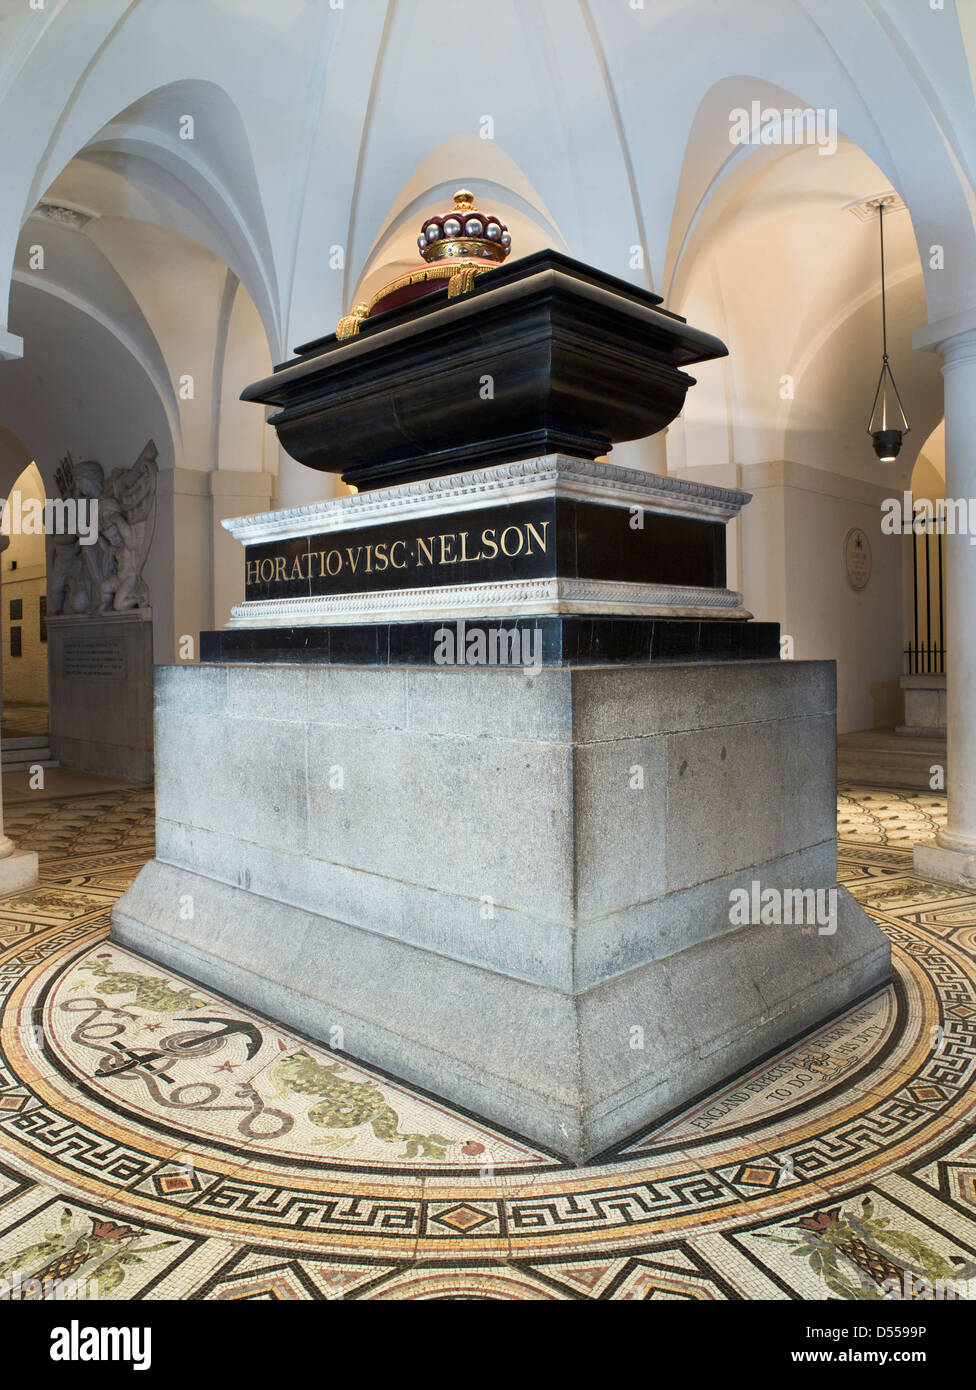 Saint Paul's Cathedral, London. Tomb of Admiral Lord Nelson (Horatio), designed by John Flaxman. In the crypt. Stock Photo